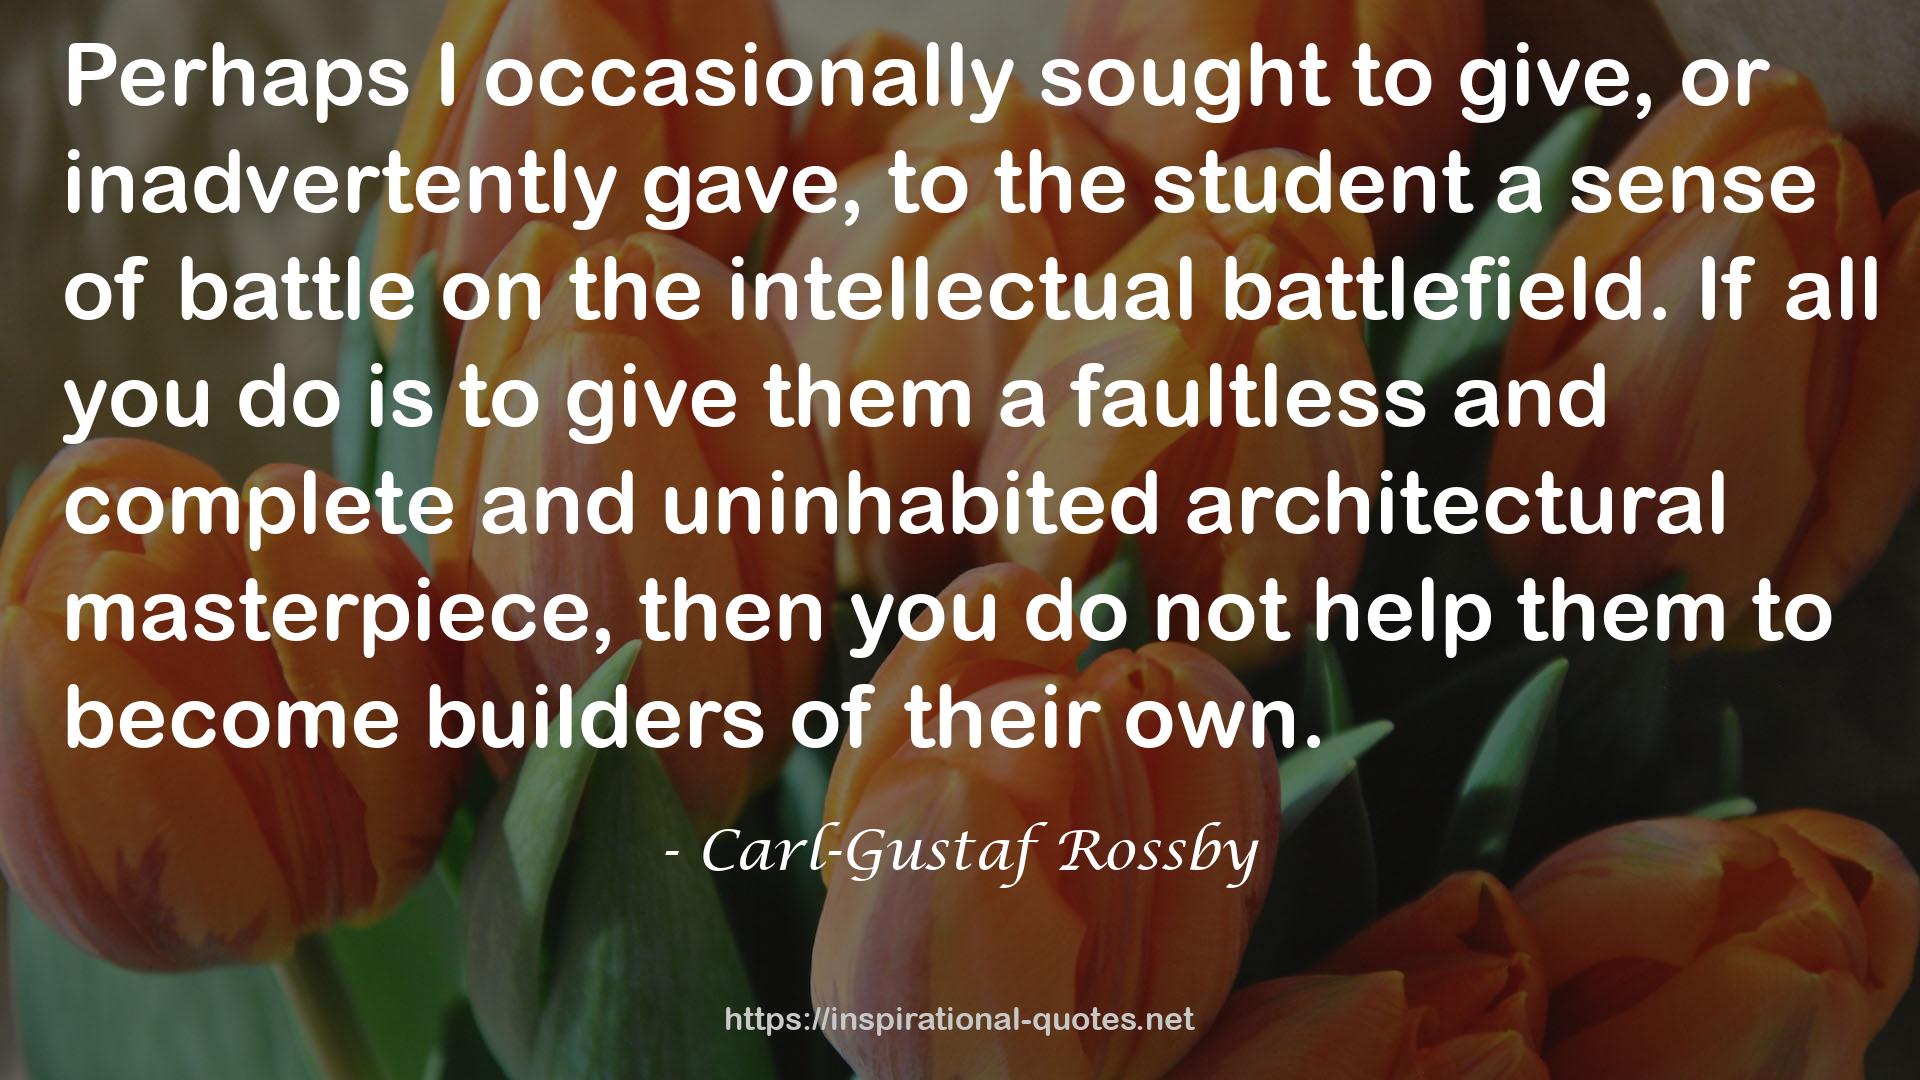 Carl-Gustaf Rossby QUOTES